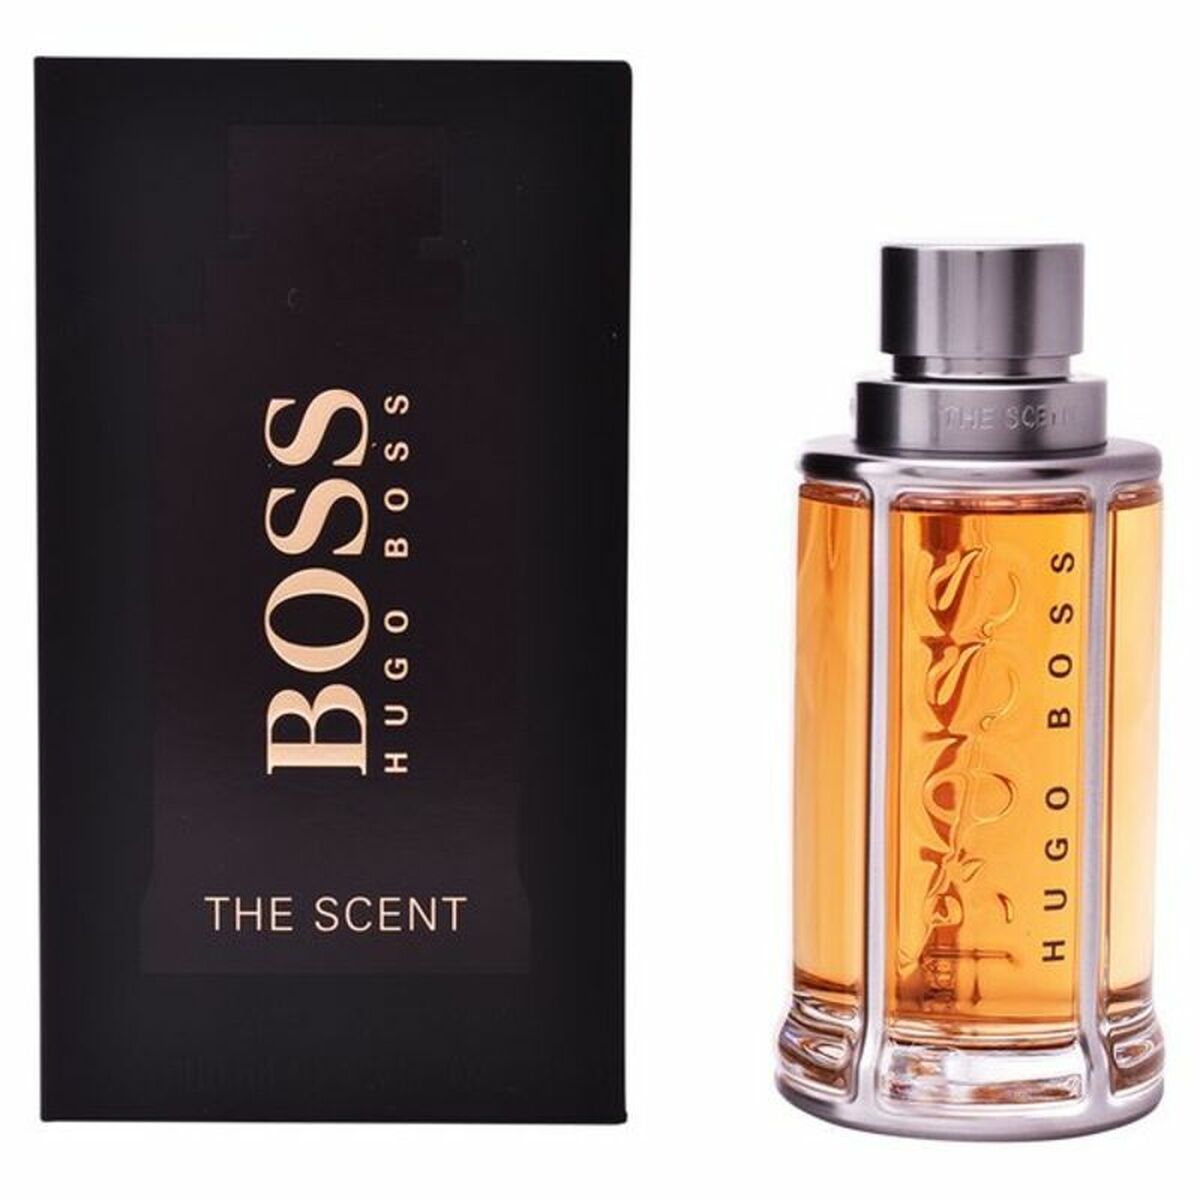 Kaufe Aftershave Lotion The Scent Hugo Boss BOS644 100 ml bei AWK Flagship um € 62.00